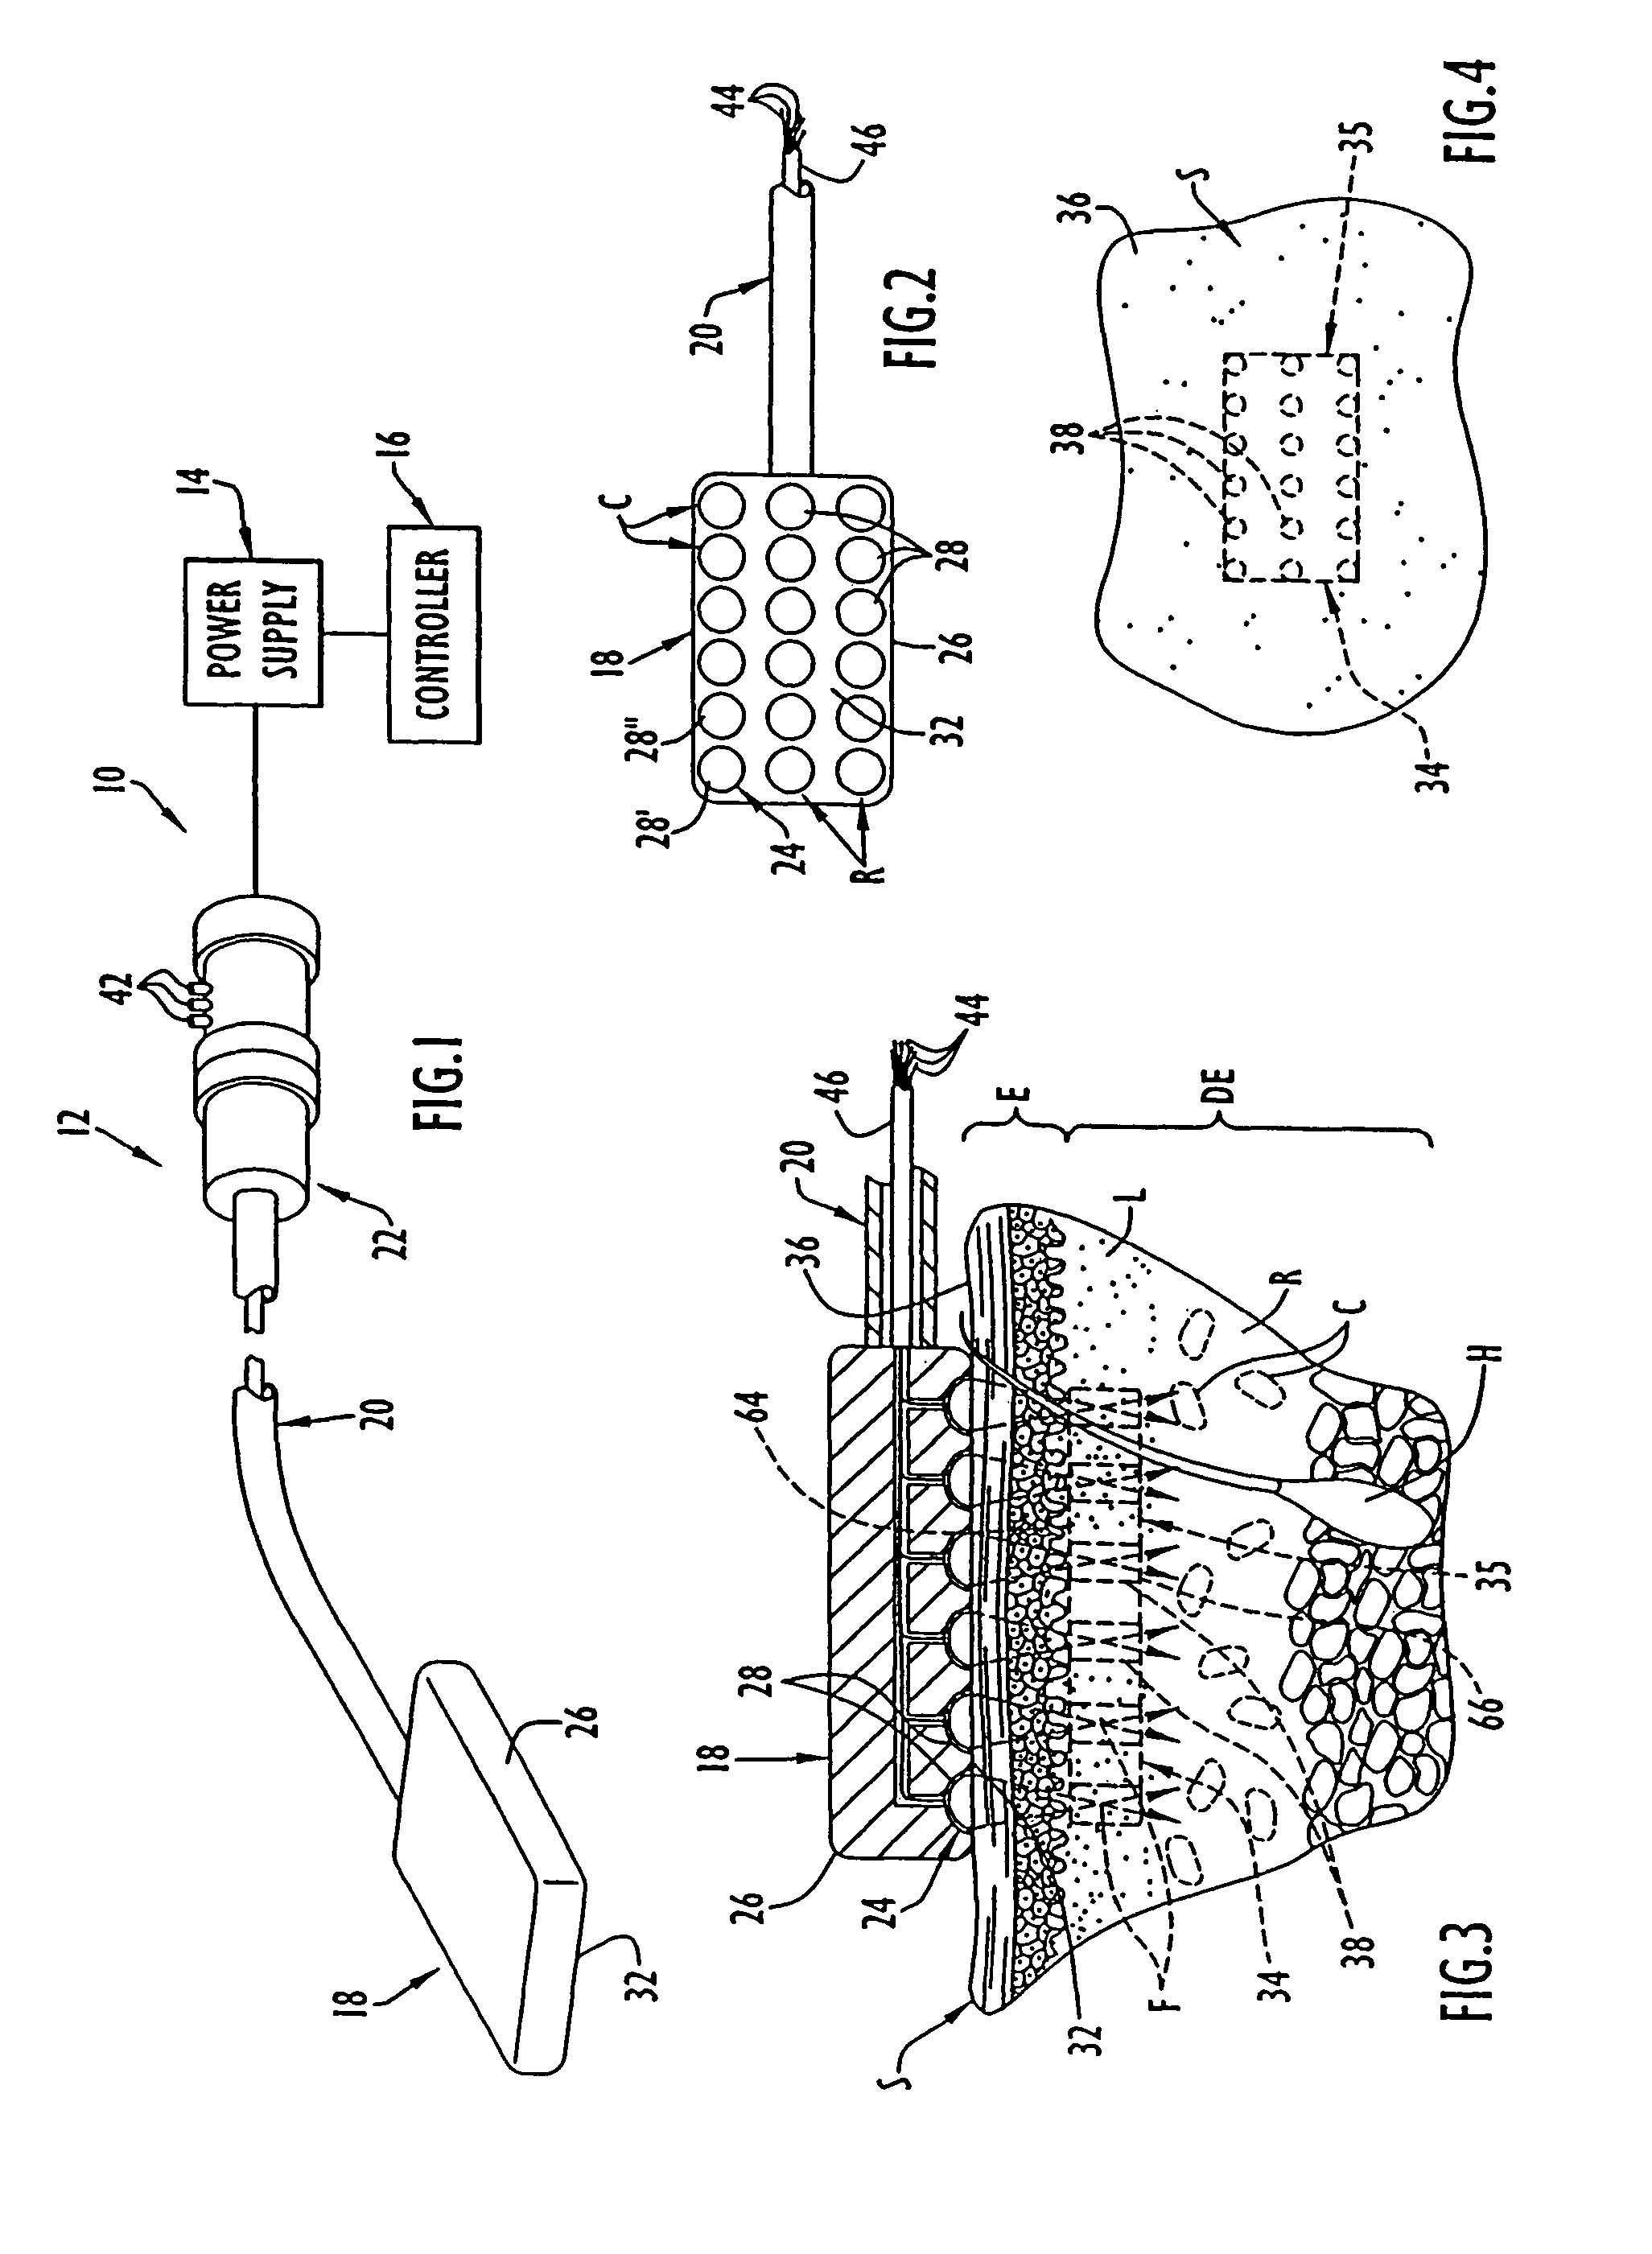 Method for guiding a medical device